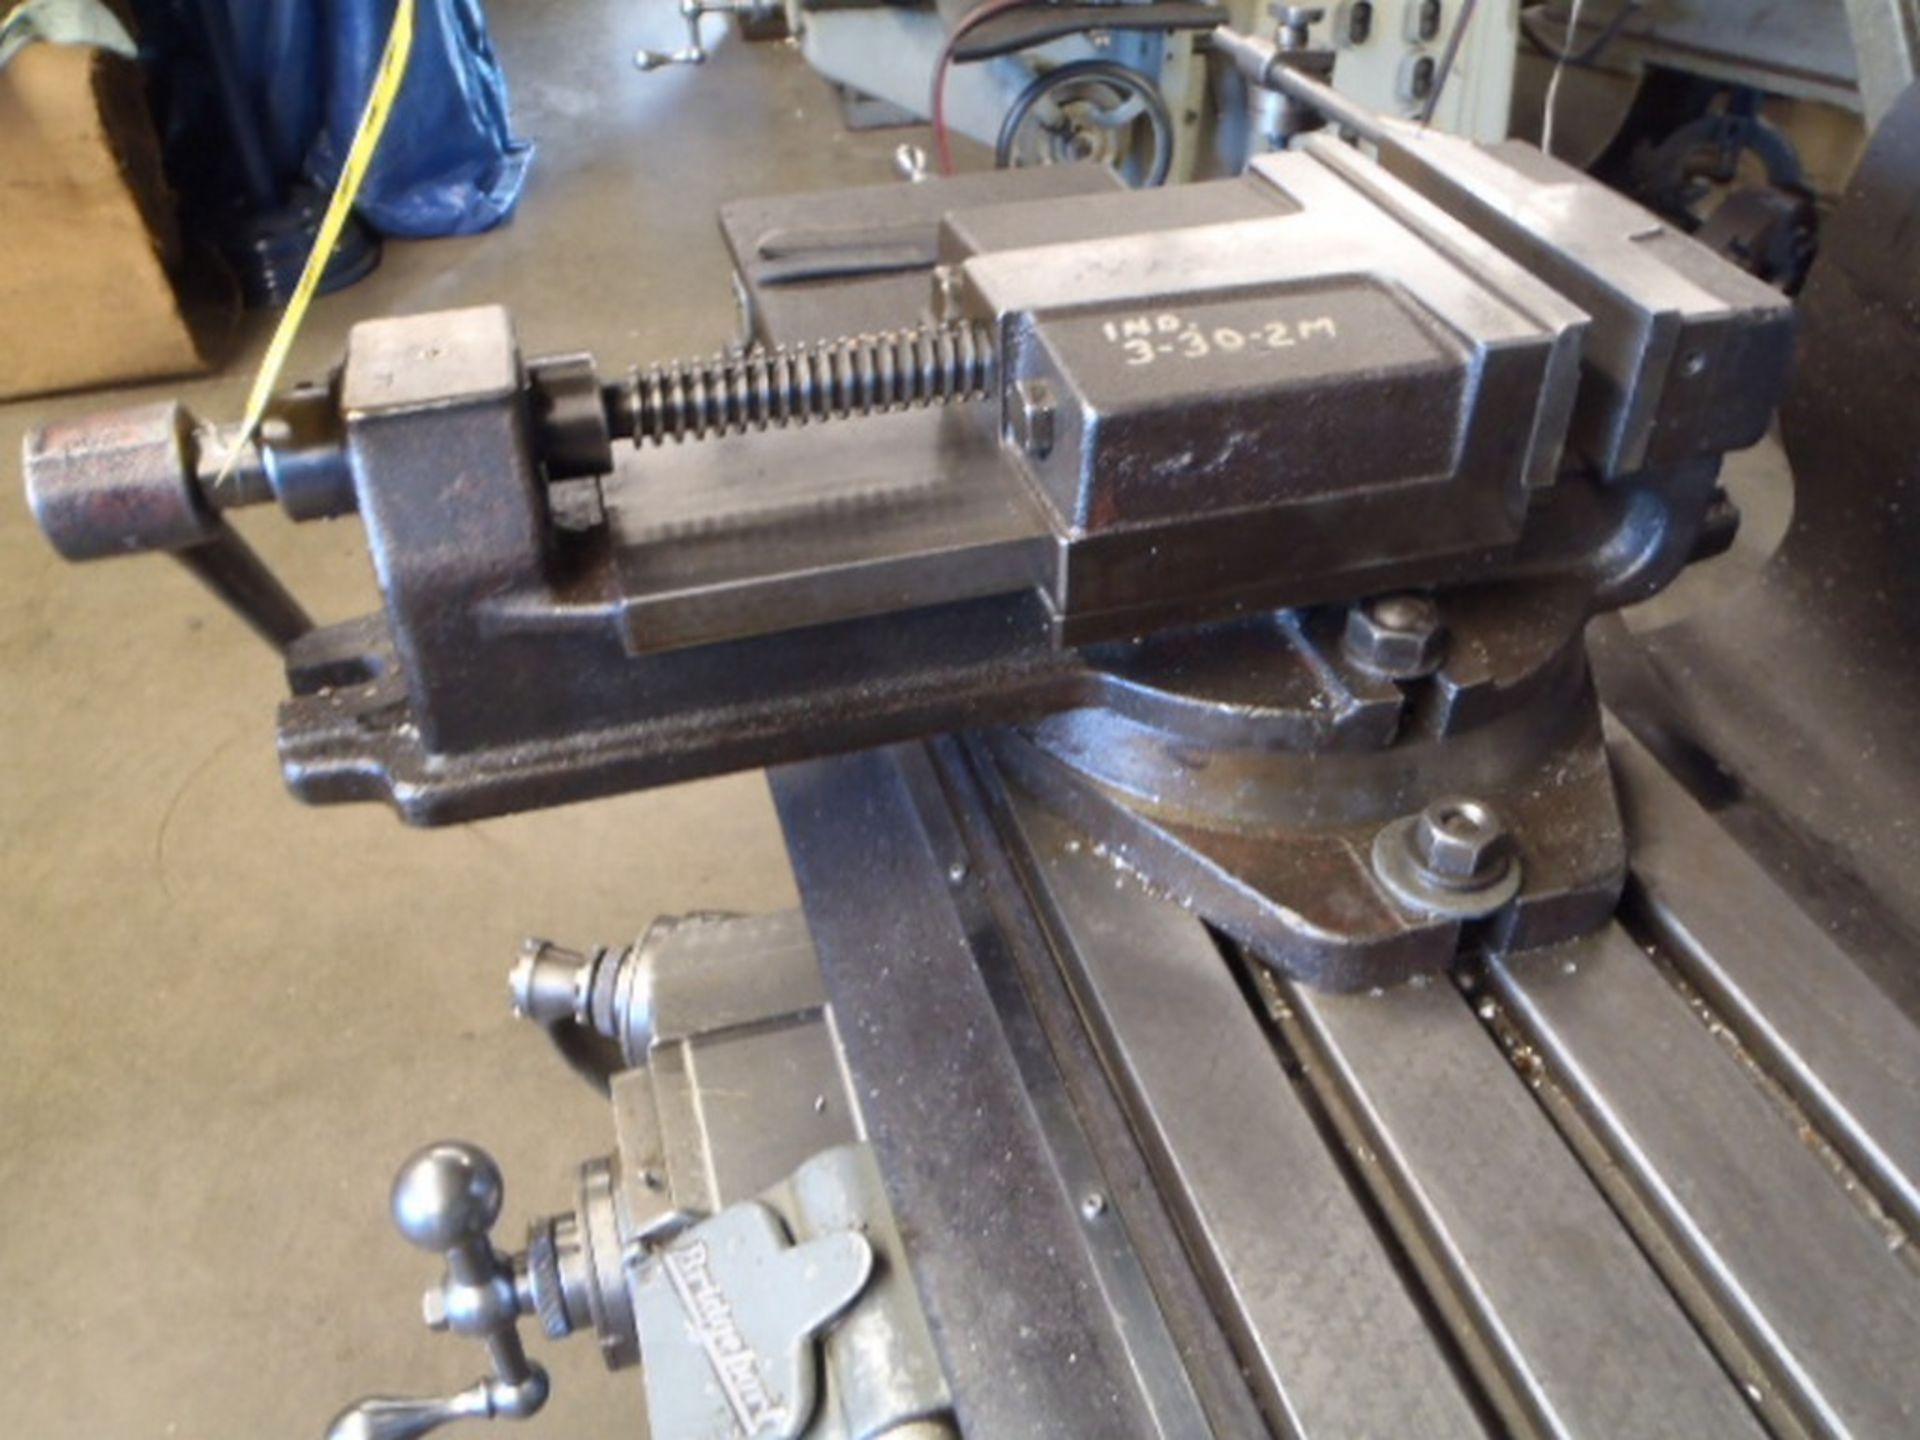 6" MILL VISE WITH ROTARY BASE